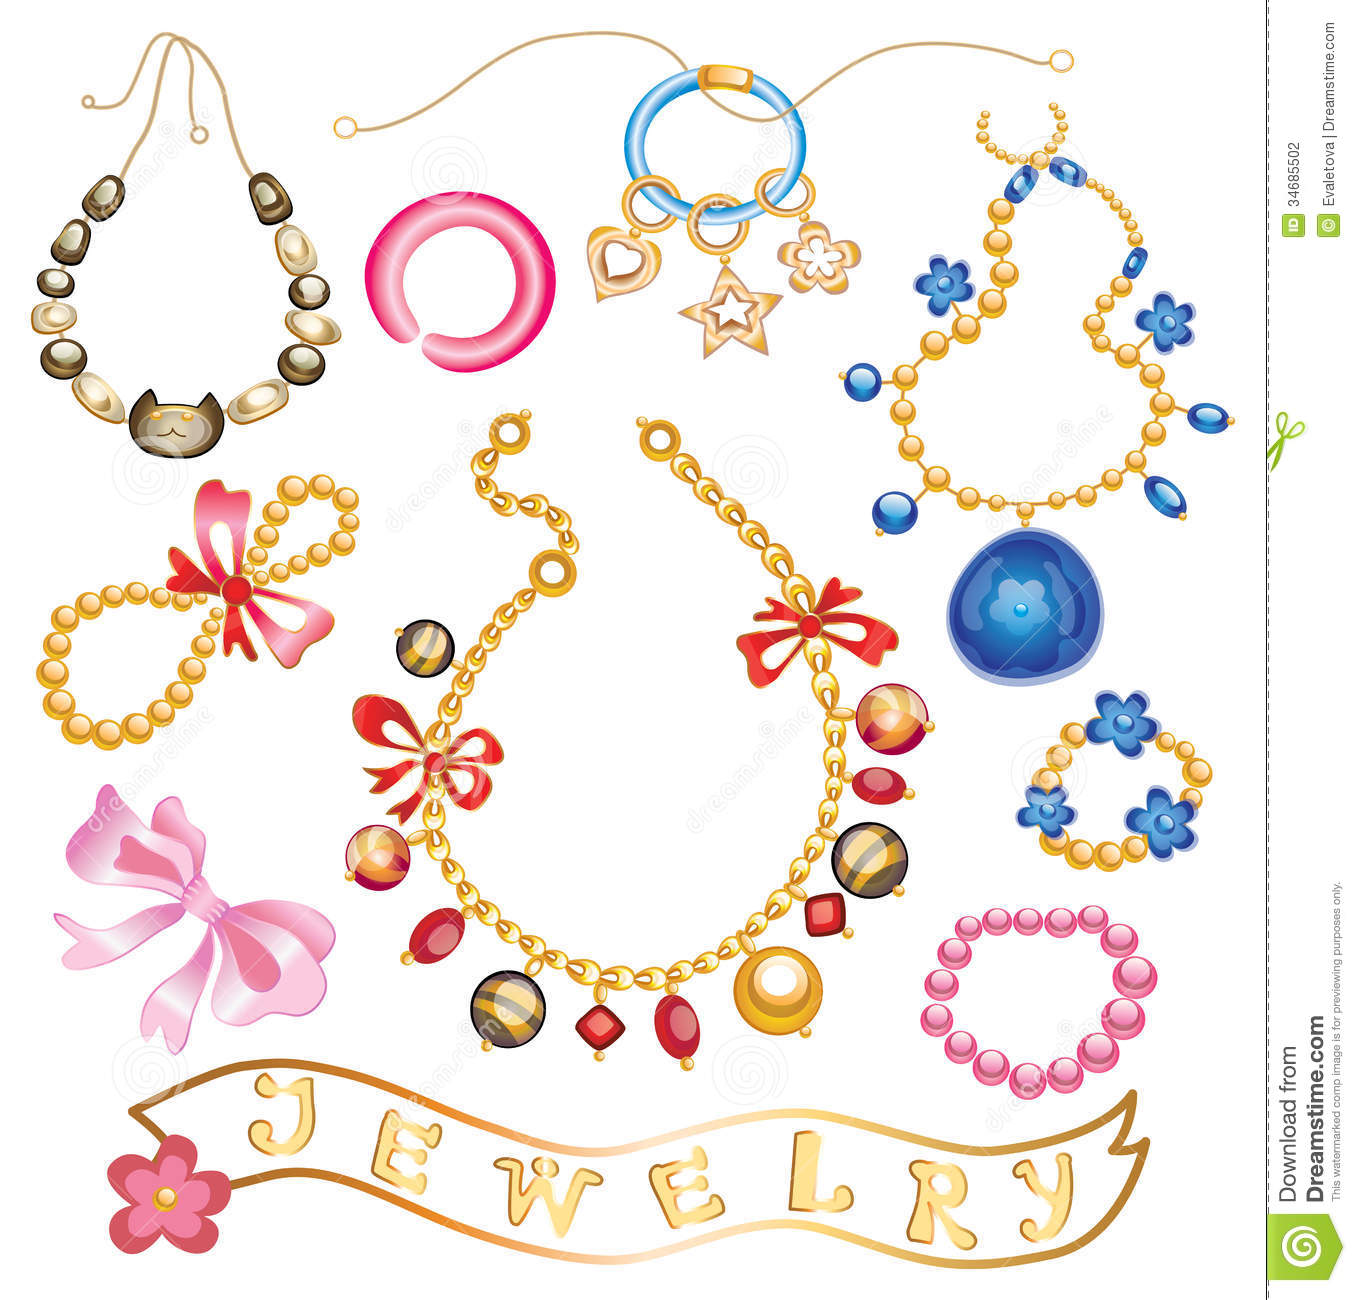 Fashion Jewelry Clip Art Collection Of Gold Jewelery With Precious